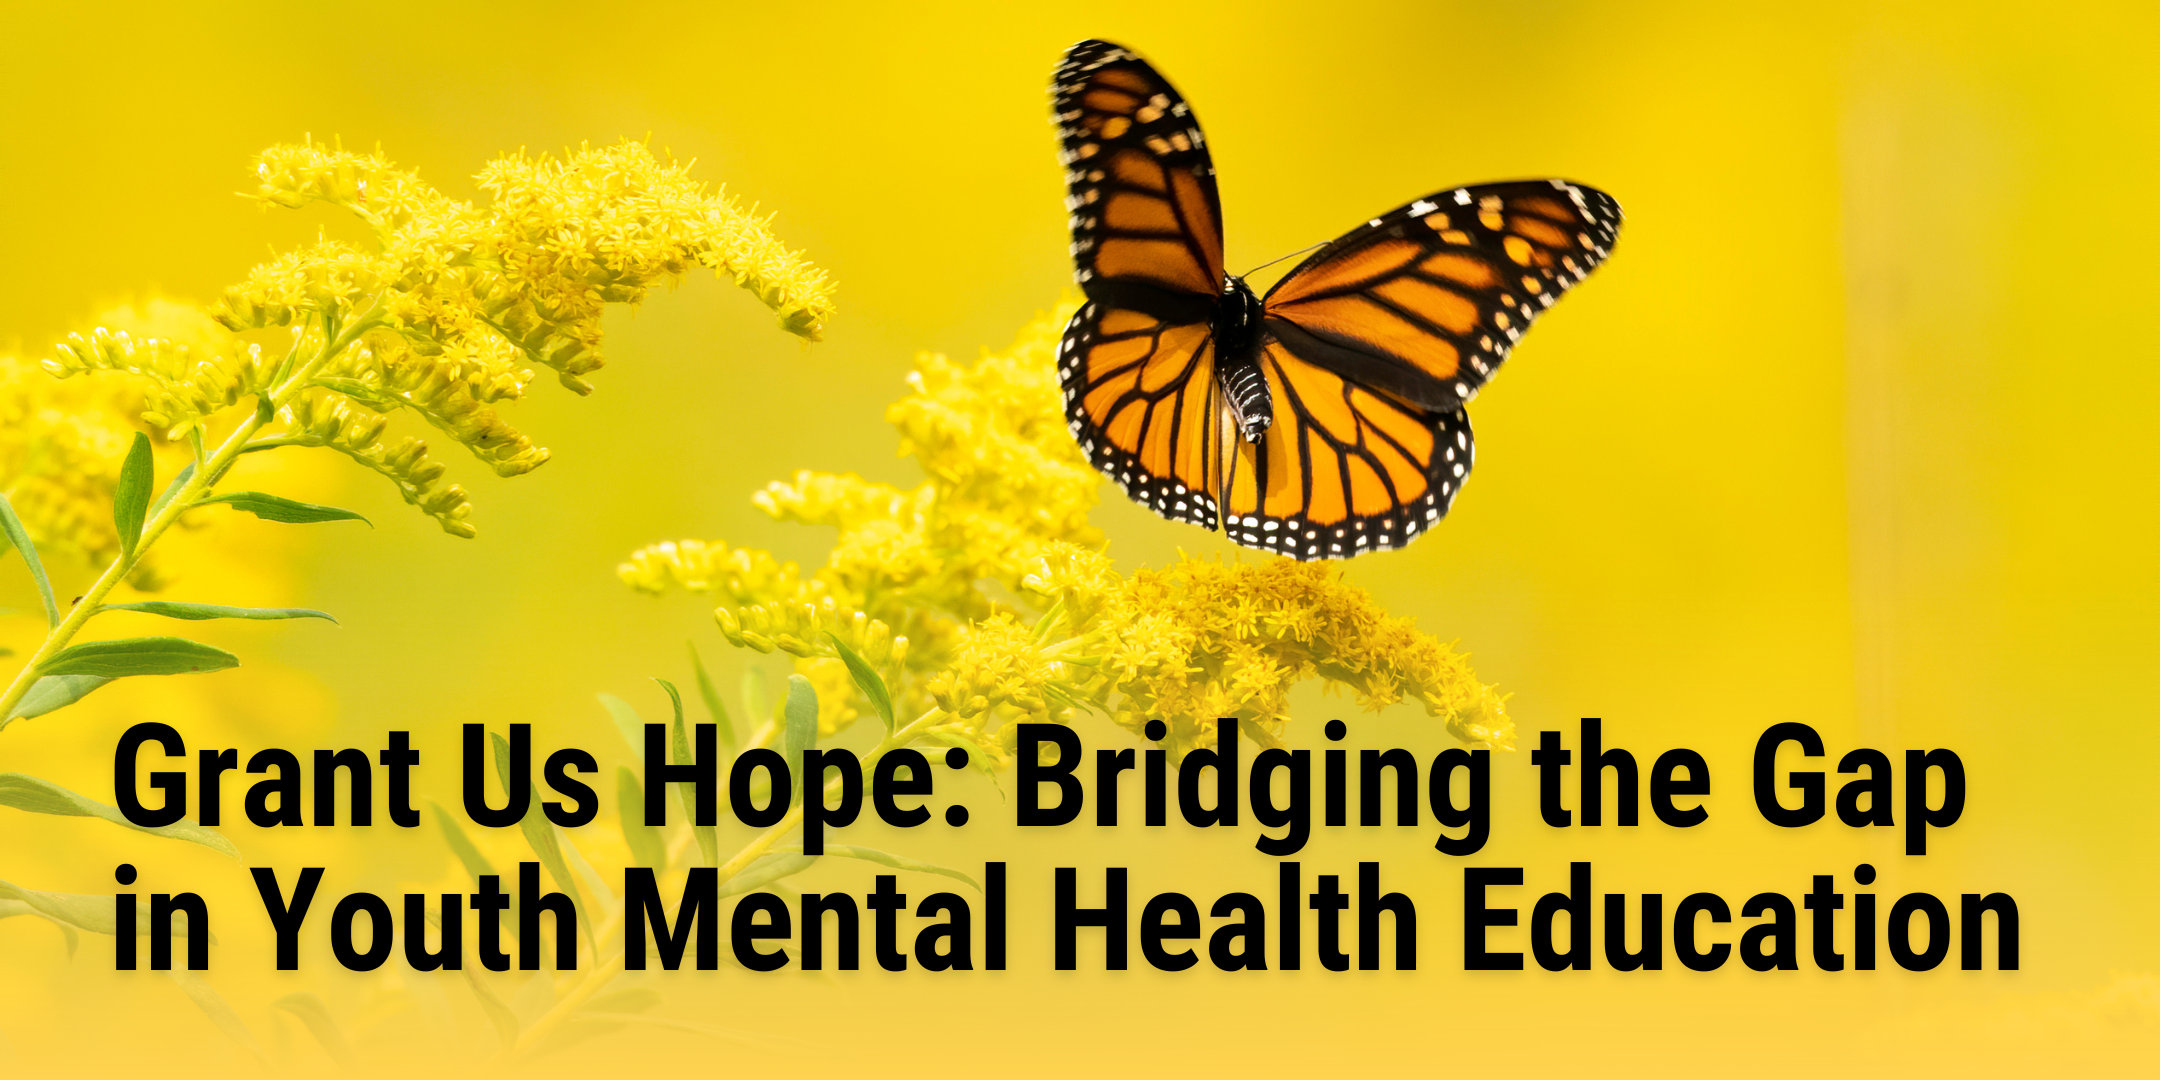 A yellow banner with wildflowers and a monarch butterfly. Displays the blog title "Grant Us Hope: Bridging the Gap in Youth Mental Health Education".